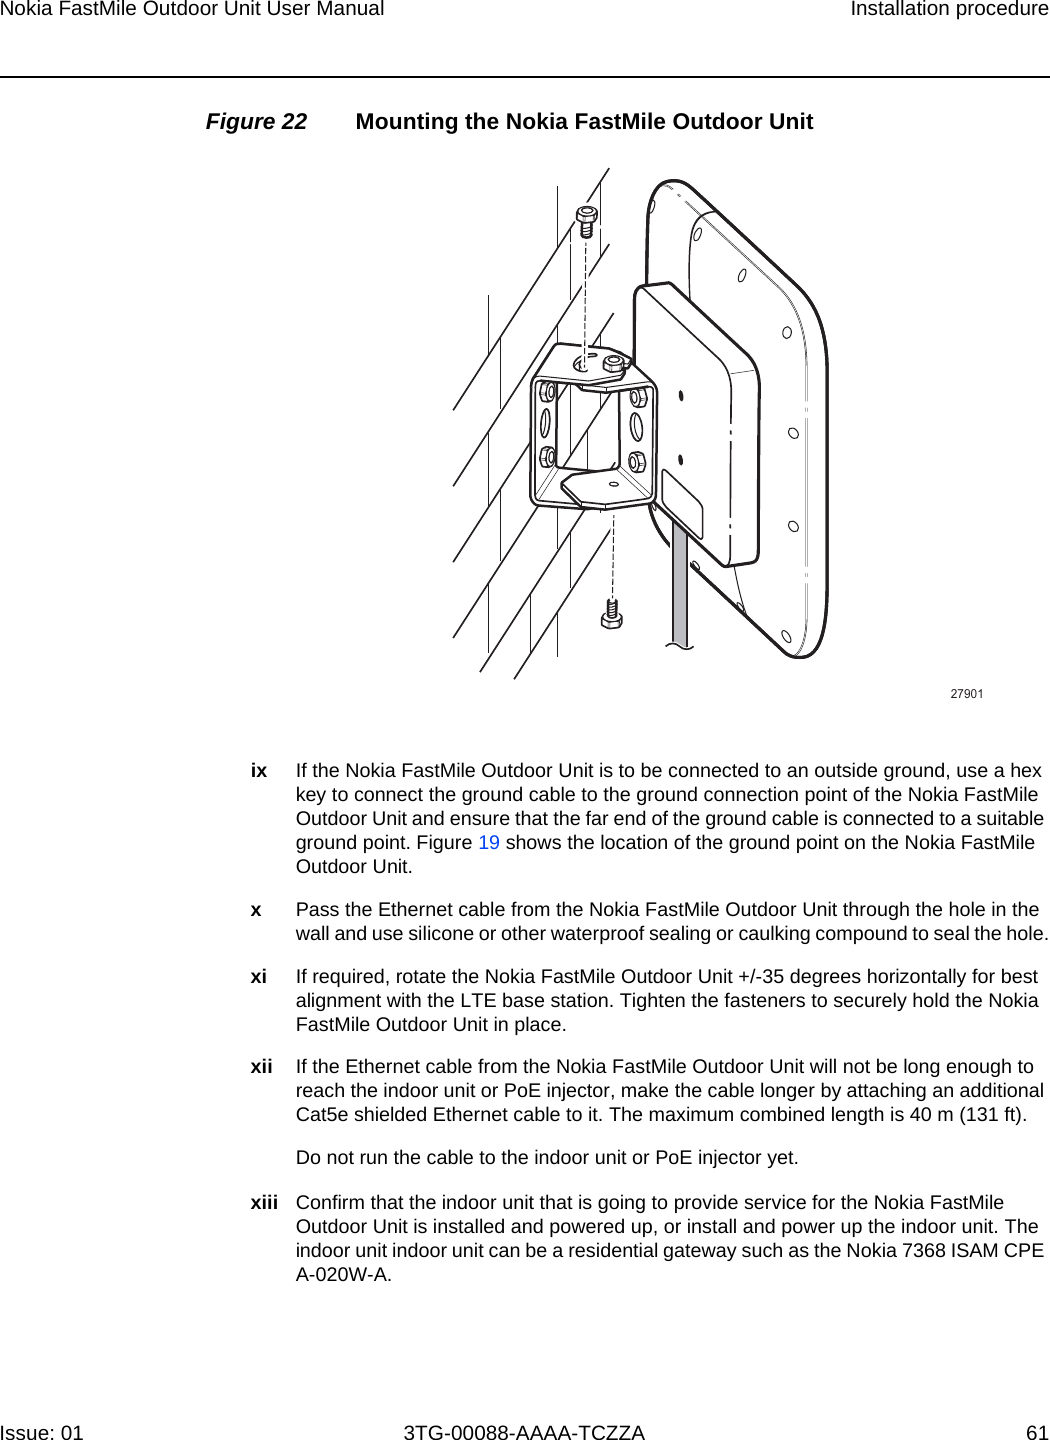 Nokia FastMile Outdoor Unit User Manual Installation procedureIssue: 01 3TG-00088-AAAA-TCZZA 61 Figure 22 Mounting the Nokia FastMile Outdoor Unitix If the Nokia FastMile Outdoor Unit is to be connected to an outside ground, use a hex key to connect the ground cable to the ground connection point of the Nokia FastMile Outdoor Unit and ensure that the far end of the ground cable is connected to a suitable ground point. Figure 19 shows the location of the ground point on the Nokia FastMile Outdoor Unit. xPass the Ethernet cable from the Nokia FastMile Outdoor Unit through the hole in the wall and use silicone or other waterproof sealing or caulking compound to seal the hole.xi If required, rotate the Nokia FastMile Outdoor Unit +/-35 degrees horizontally for best alignment with the LTE base station. Tighten the fasteners to securely hold the Nokia FastMile Outdoor Unit in place.xii If the Ethernet cable from the Nokia FastMile Outdoor Unit will not be long enough to reach the indoor unit or PoE injector, make the cable longer by attaching an additional Cat5e shielded Ethernet cable to it. The maximum combined length is 40 m (131 ft). Do not run the cable to the indoor unit or PoE injector yet.xiii Confirm that the indoor unit that is going to provide service for the Nokia FastMile Outdoor Unit is installed and powered up, or install and power up the indoor unit. The indoor unit indoor unit can be a residential gateway such as the Nokia 7368 ISAM CPE A-020W-A.27901